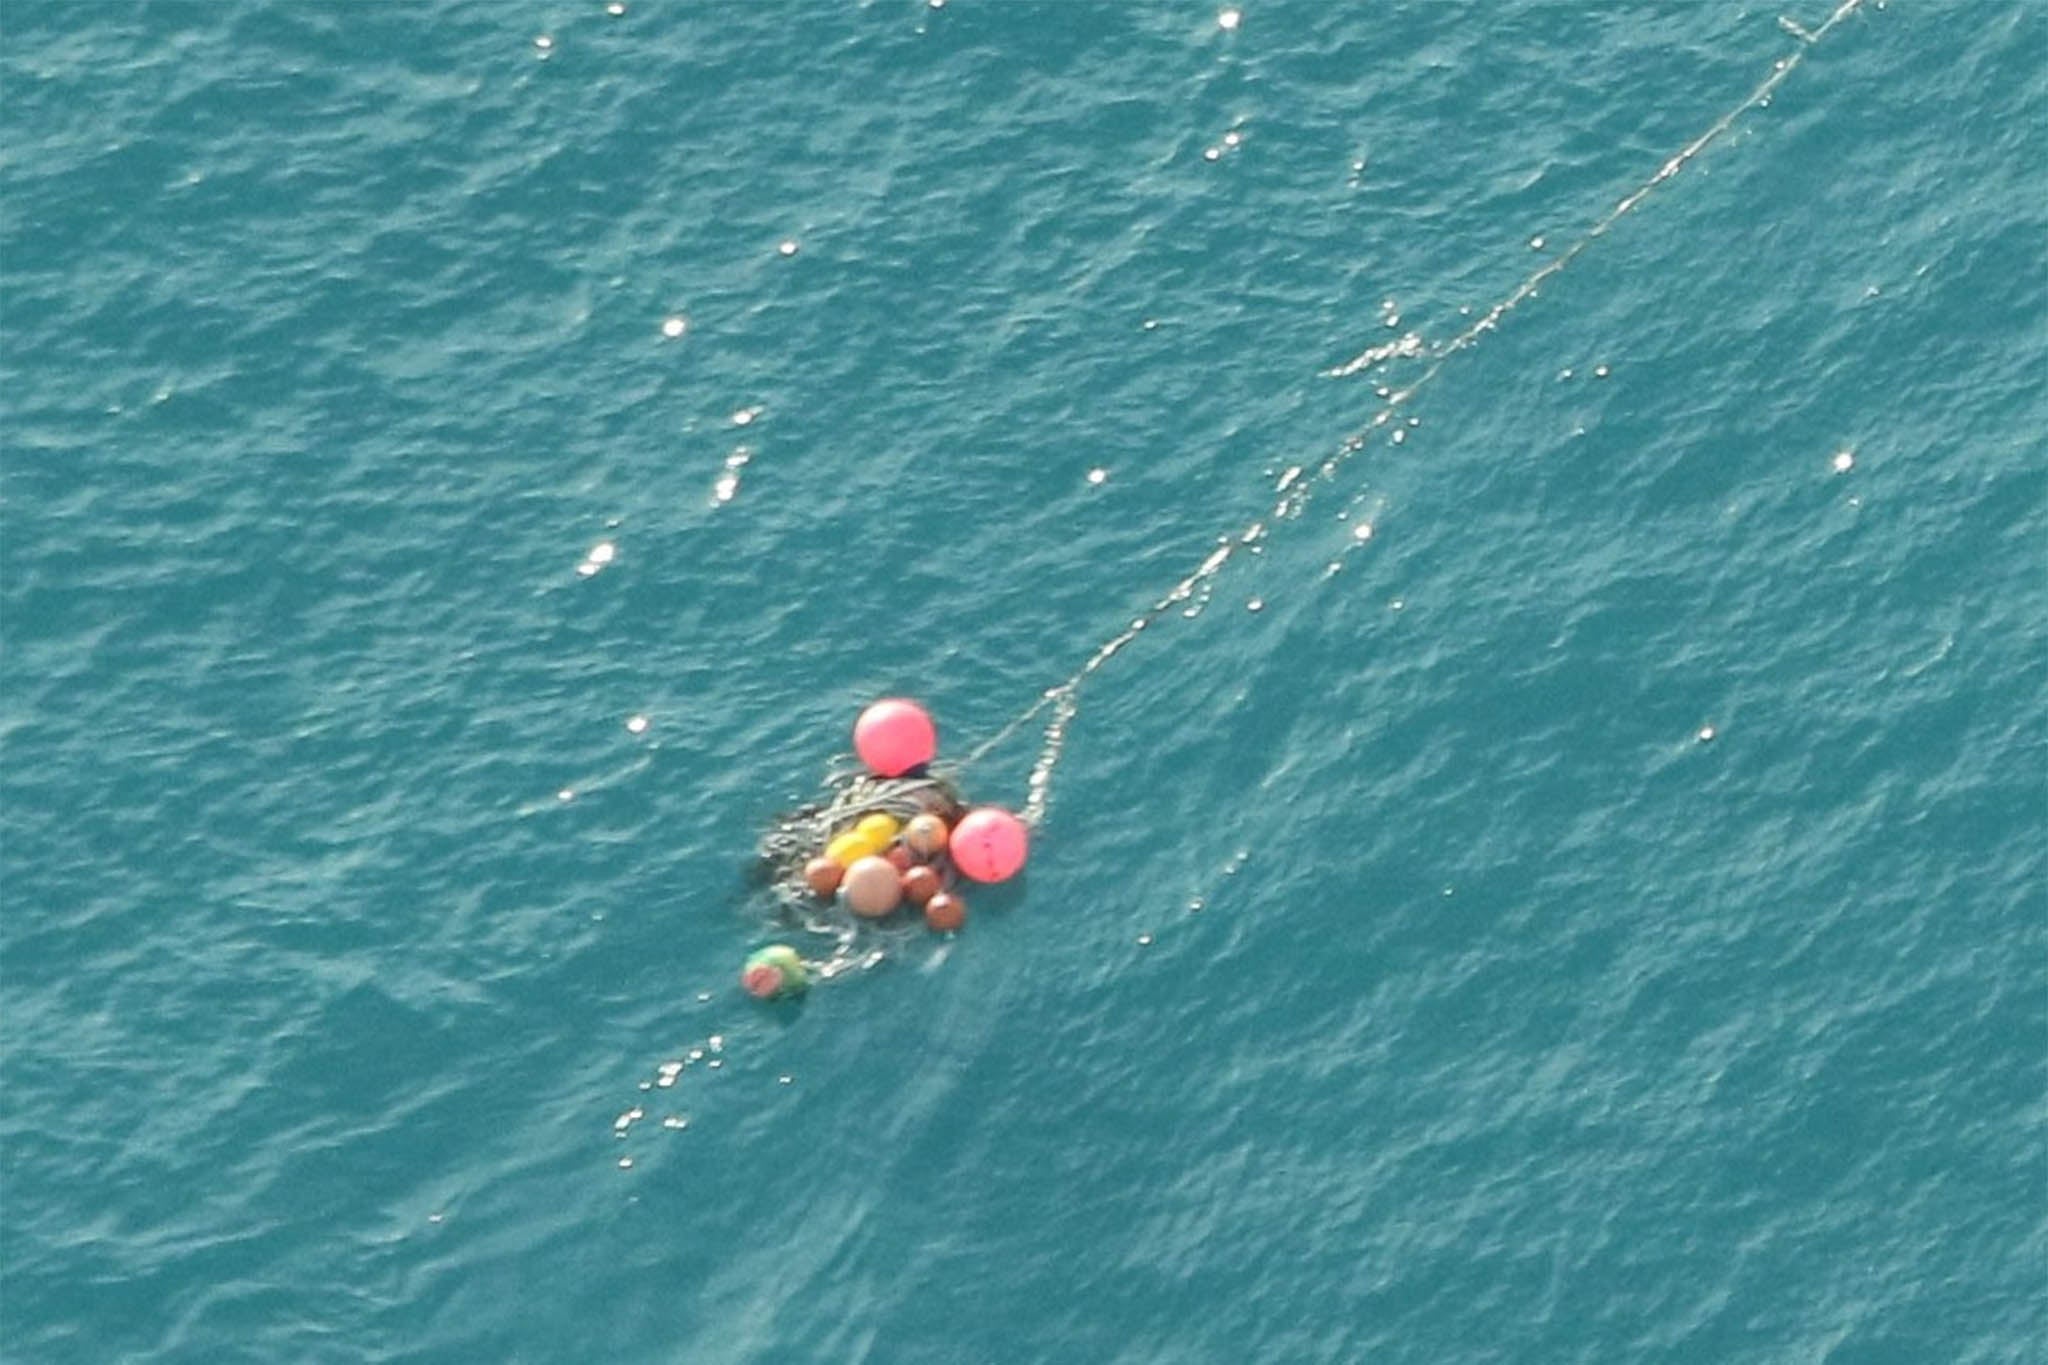 Whale was tangled up with ropes and buoys